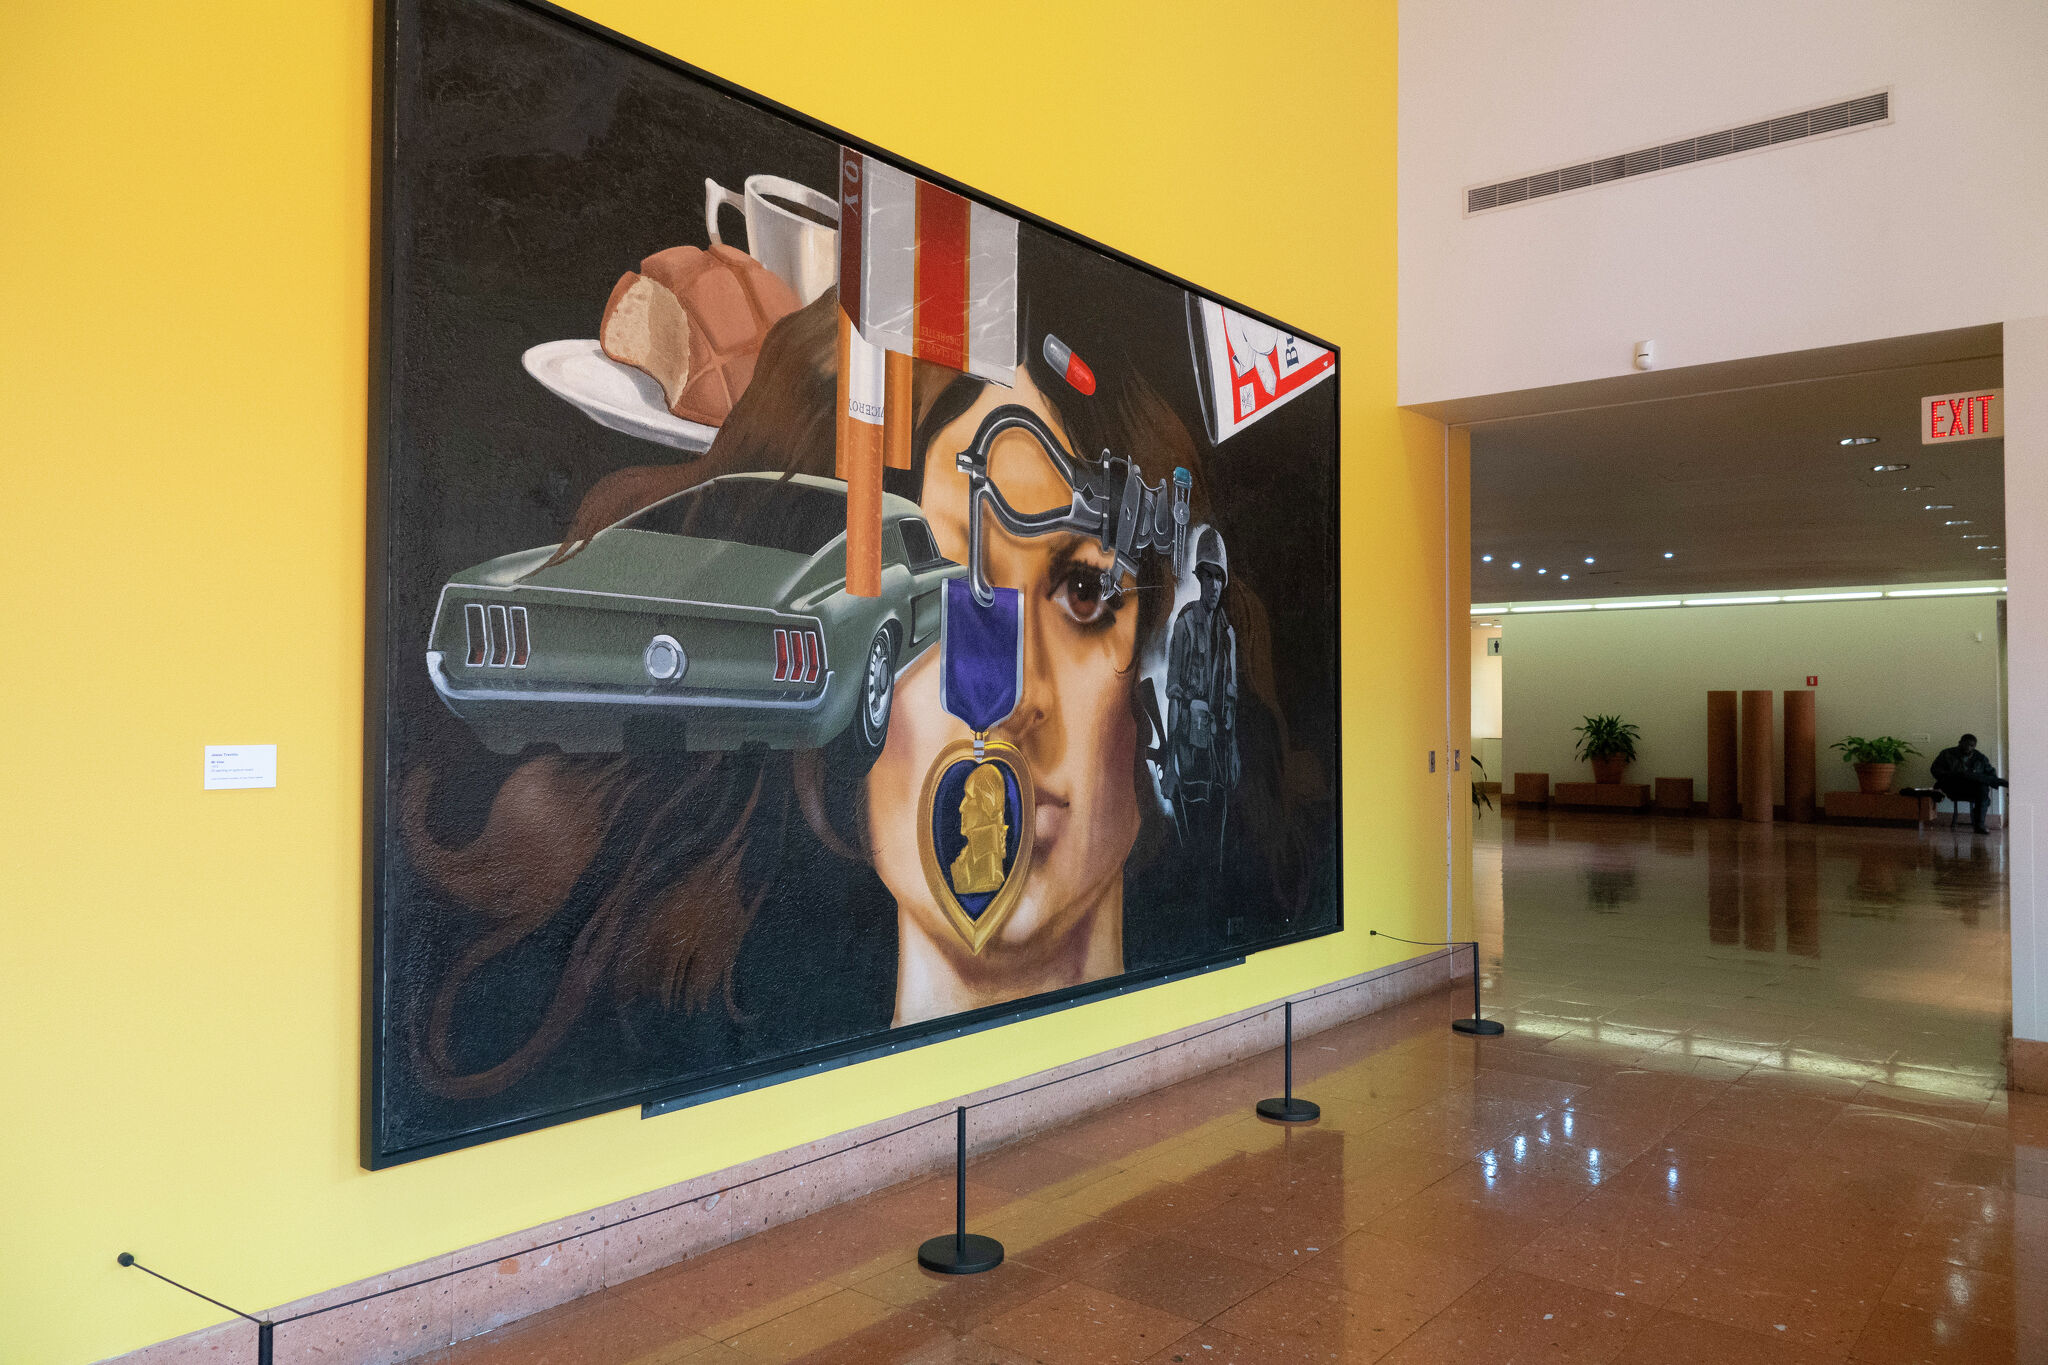 San Antonio's Central Library has an amazing art collection